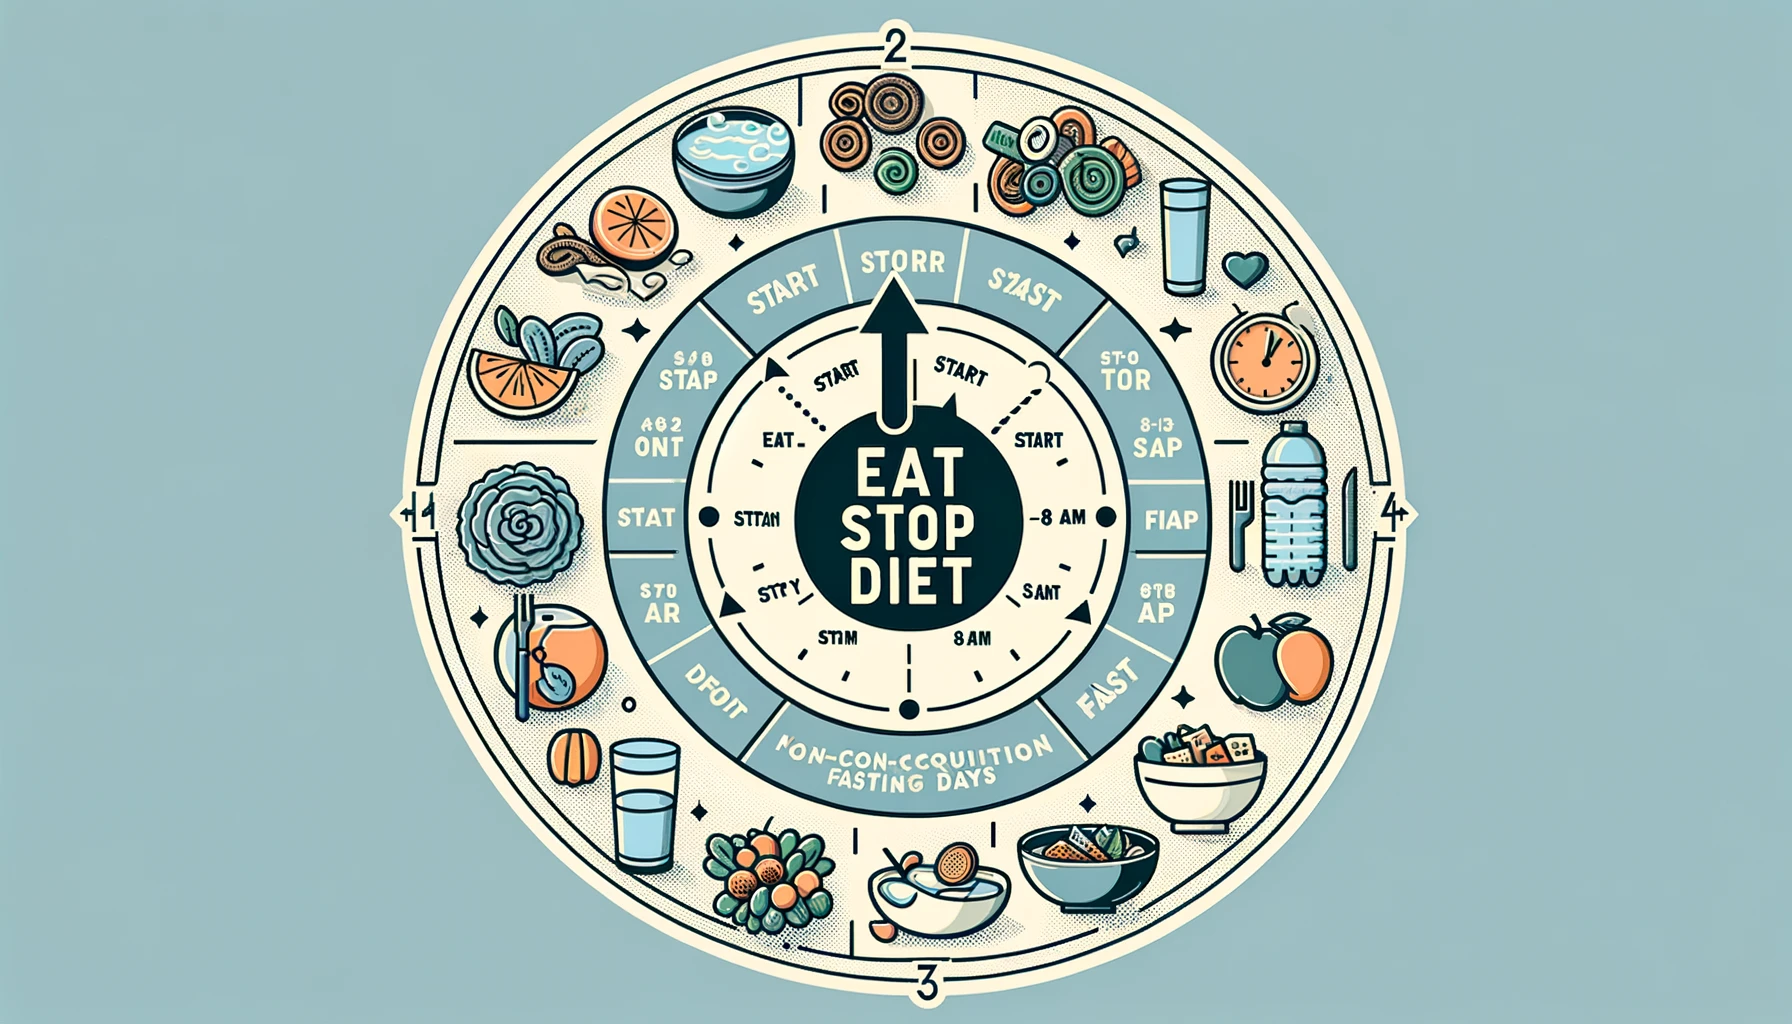 24-hour Eat Stop Diet cycle, showing fasting with an empty plate and non-fasting period with healthy foods.